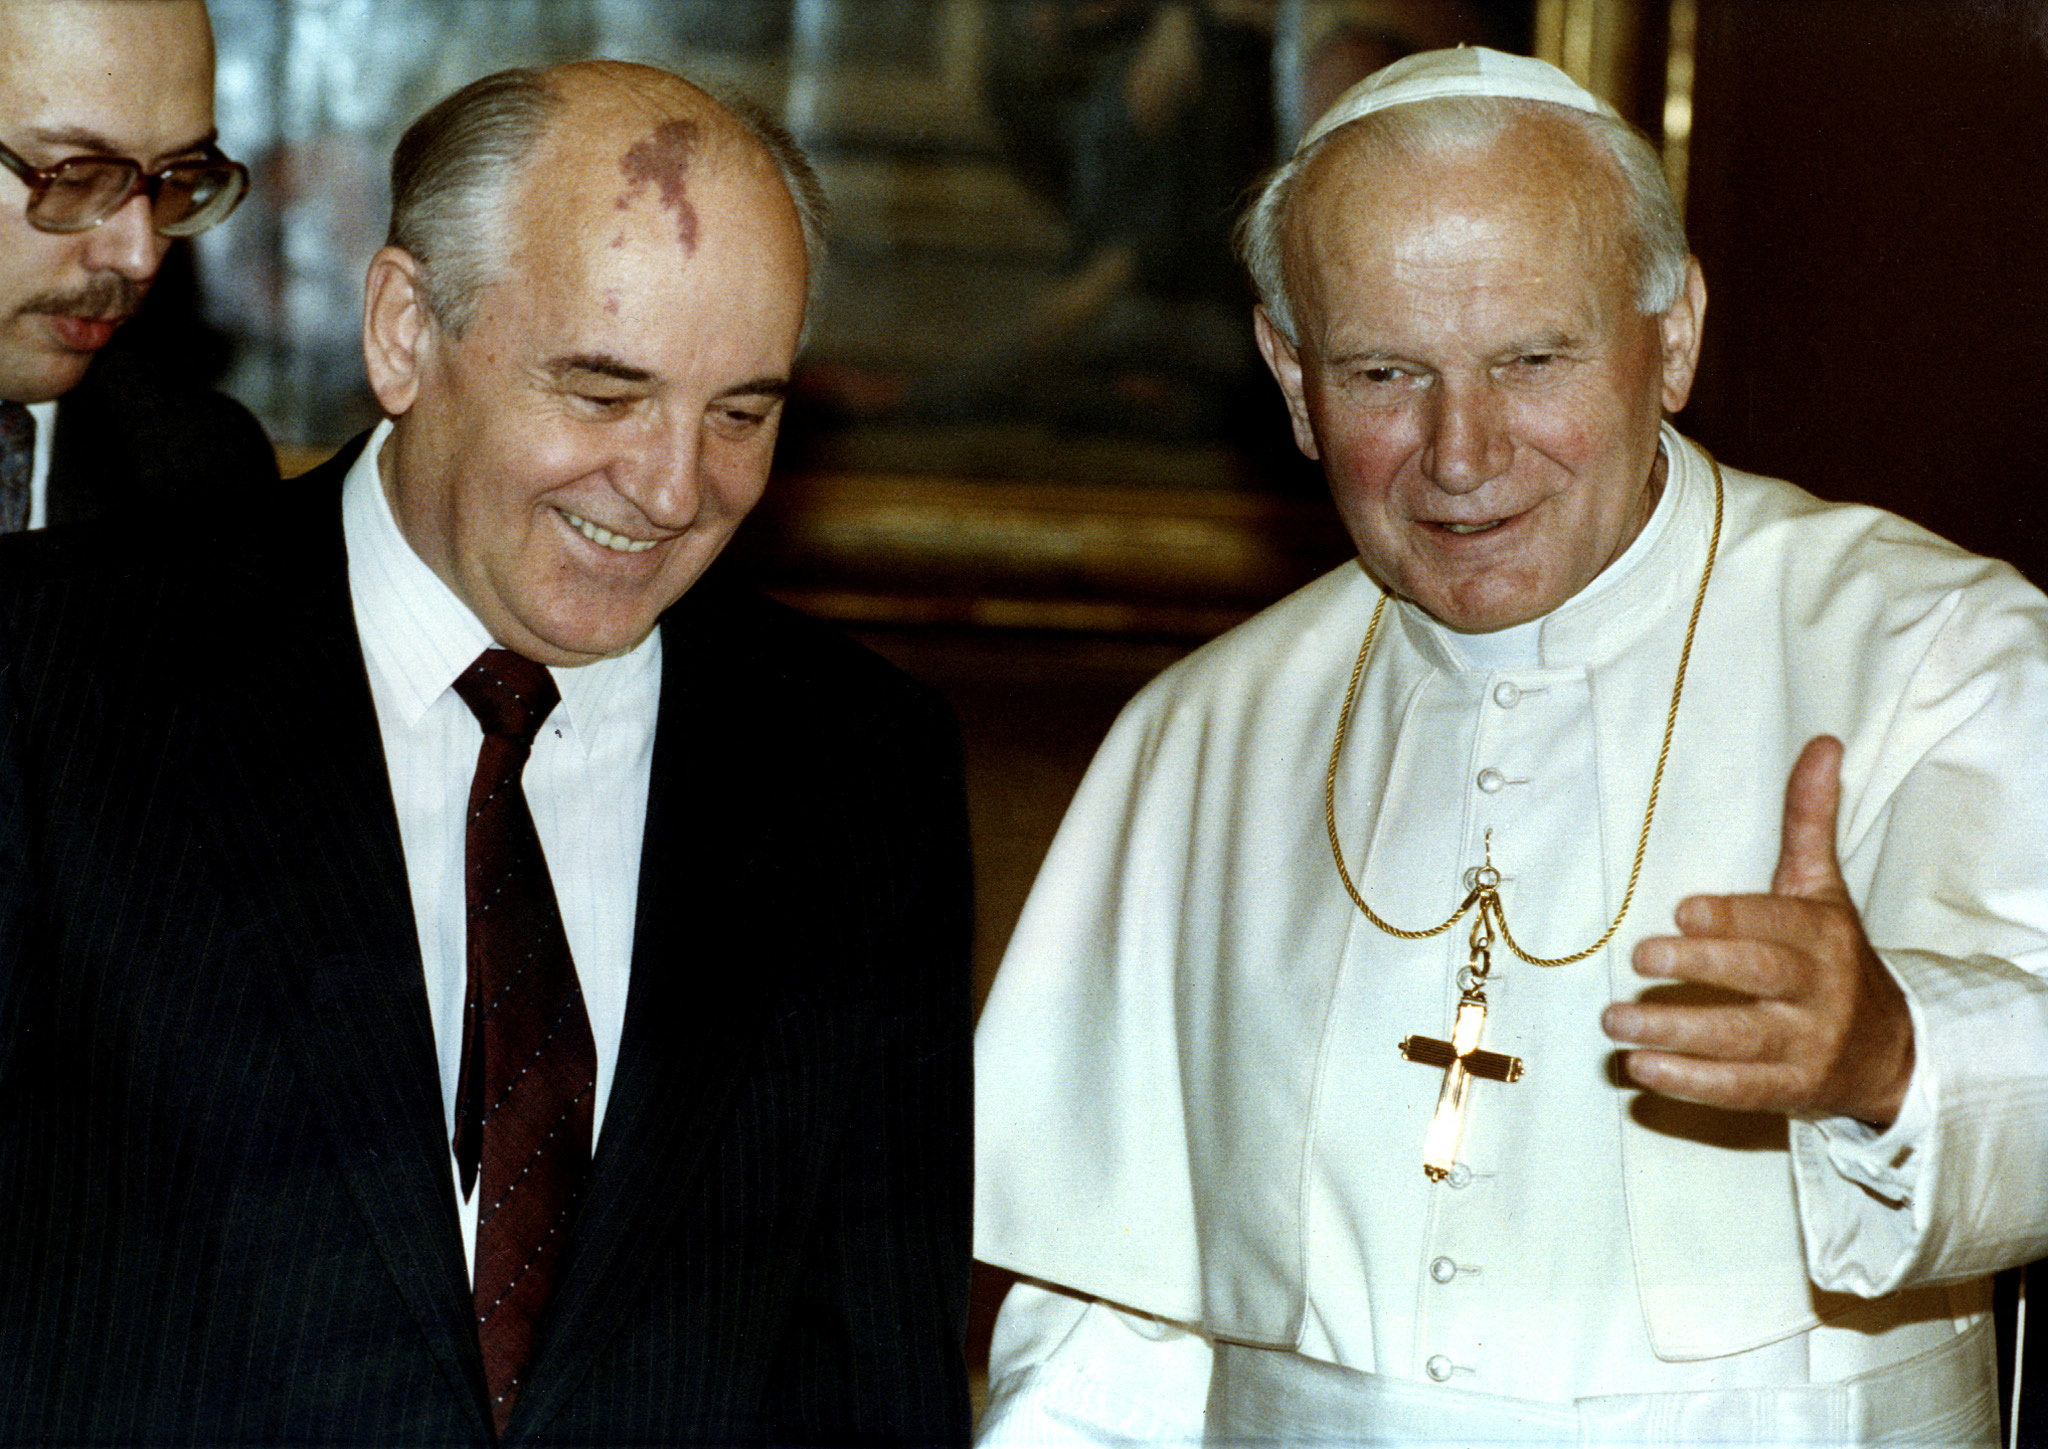 Pope John Paul II talks with former Soviet President Mikhail Gorbachev during an audience at the Vatican